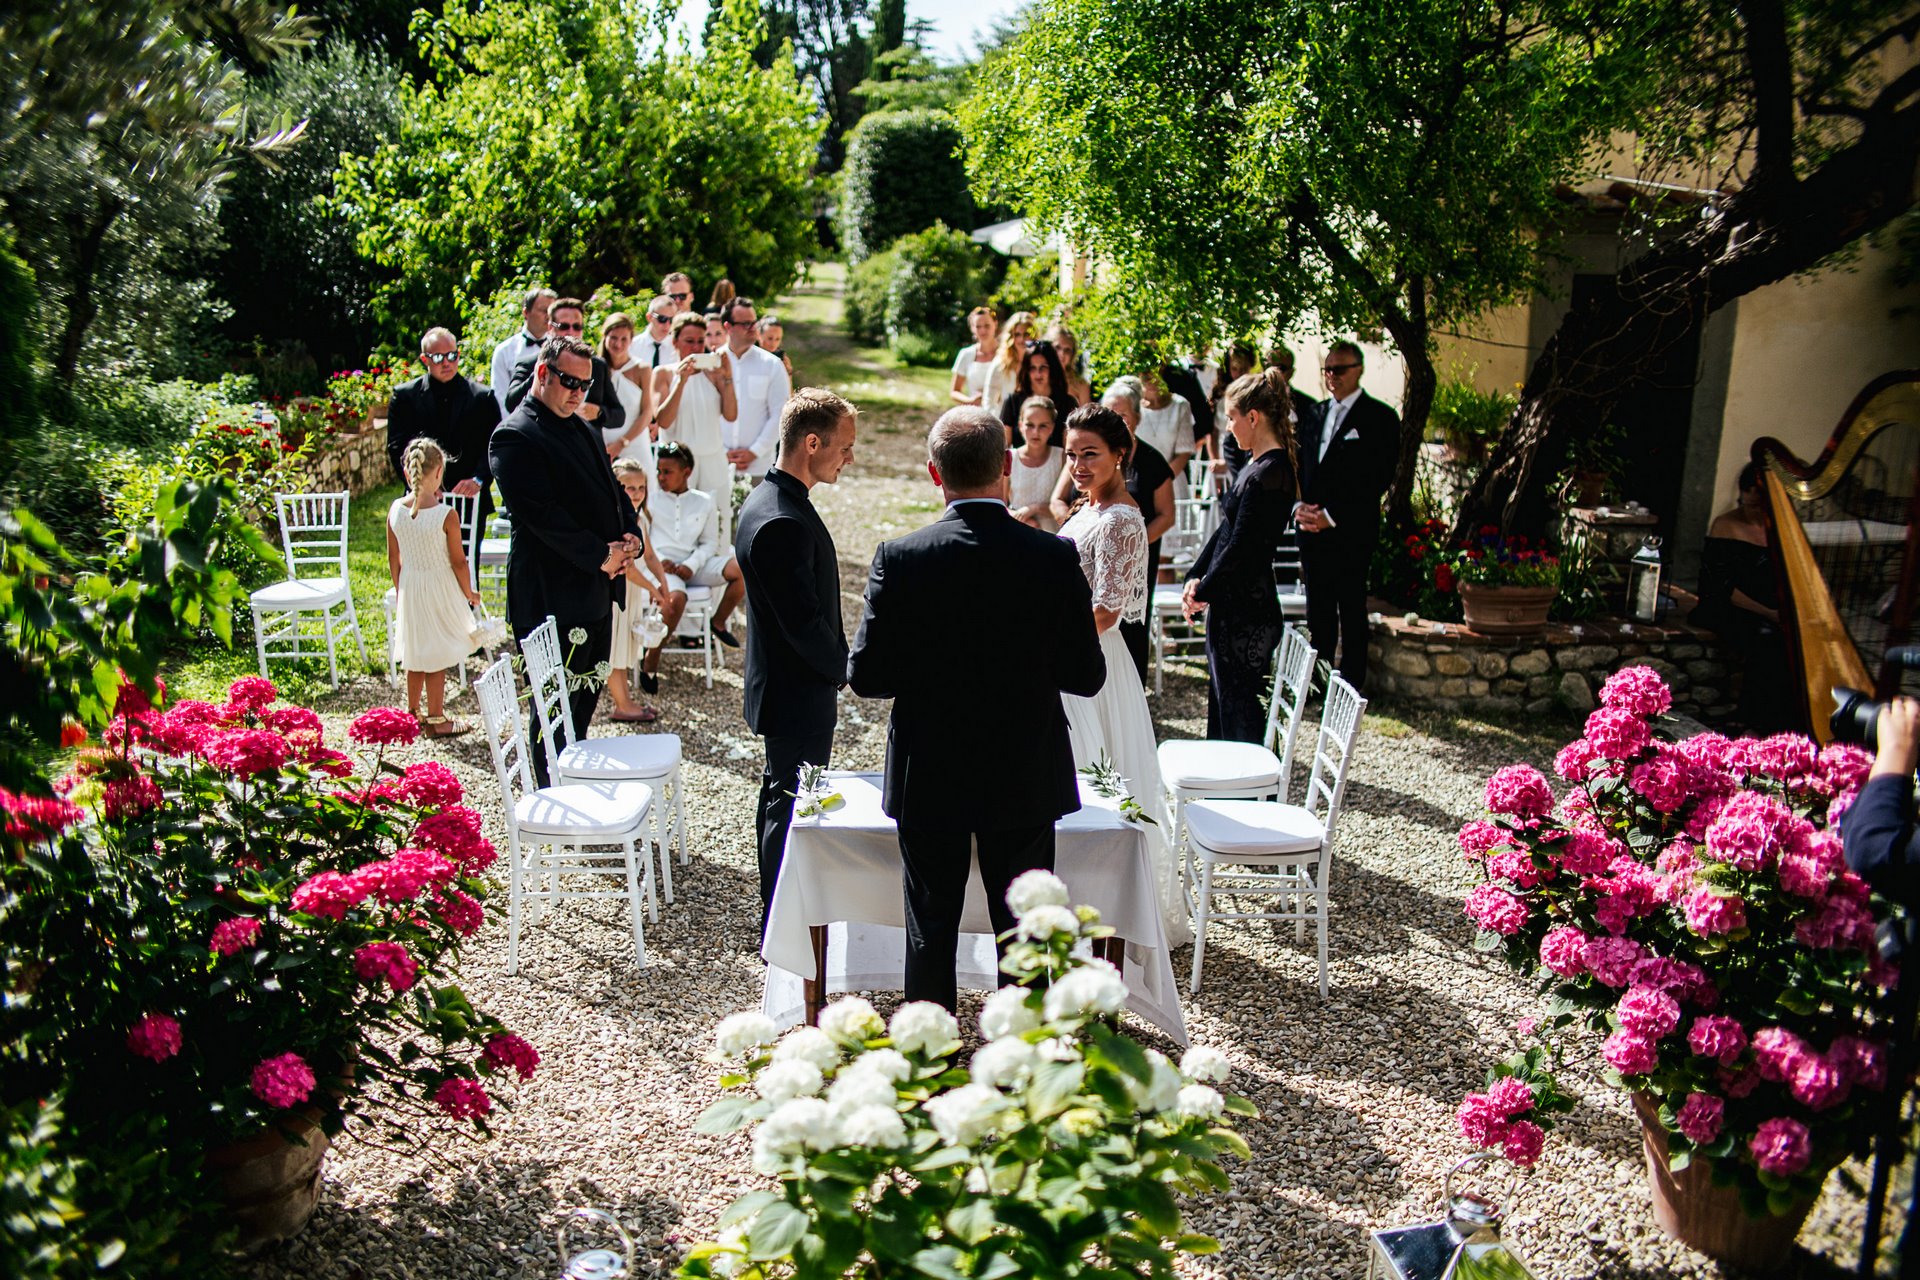 Your special day in Tuscany...